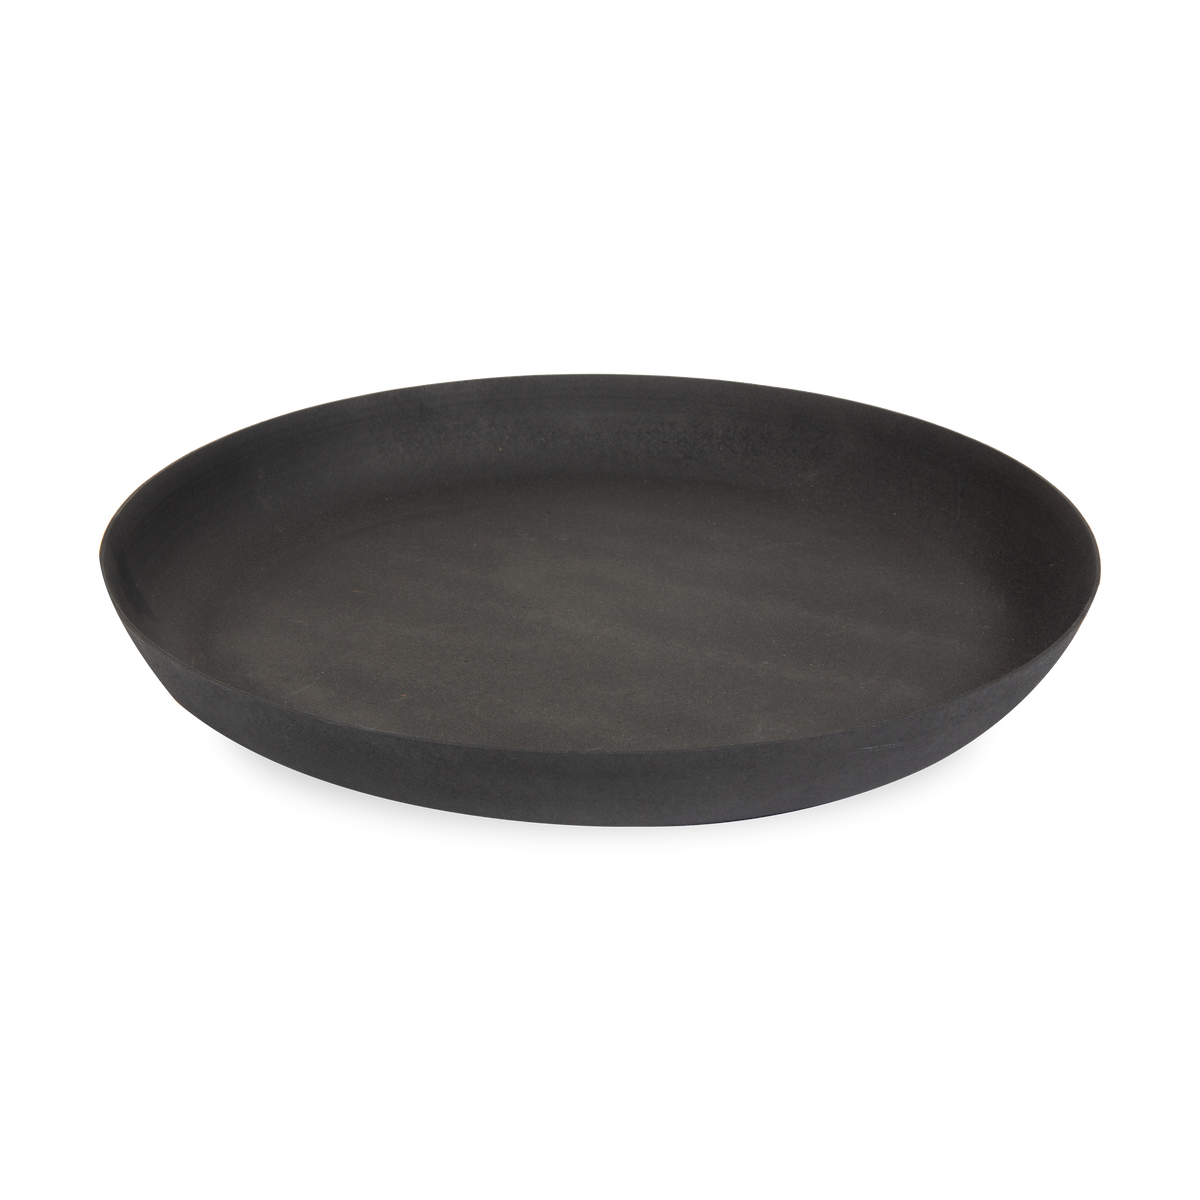 The Offering Platter in black features a simple sleek silhouette.